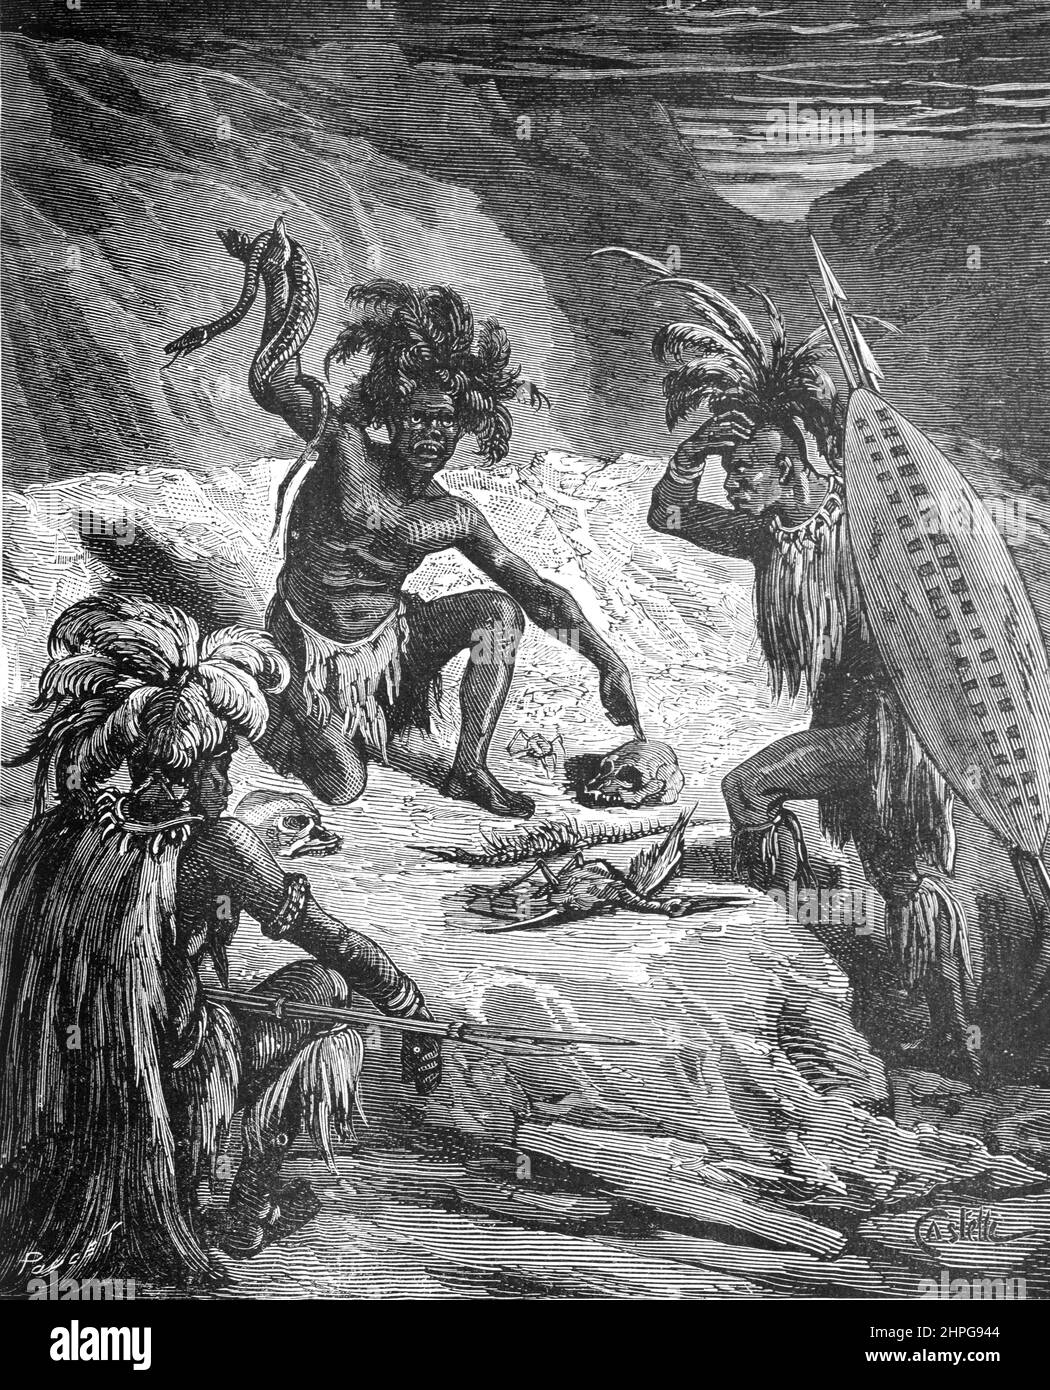 Sorcerer, Shaman, Medicine Man or Traditional Healer Using Various Animals including Snakes, Birds, Skeletons & Skulls in Animist Treratments Among the Zulus or Zulu People of Southern and South Africa. Vintage Illustration or Engraving 1879 (Castelli) Stock Photo